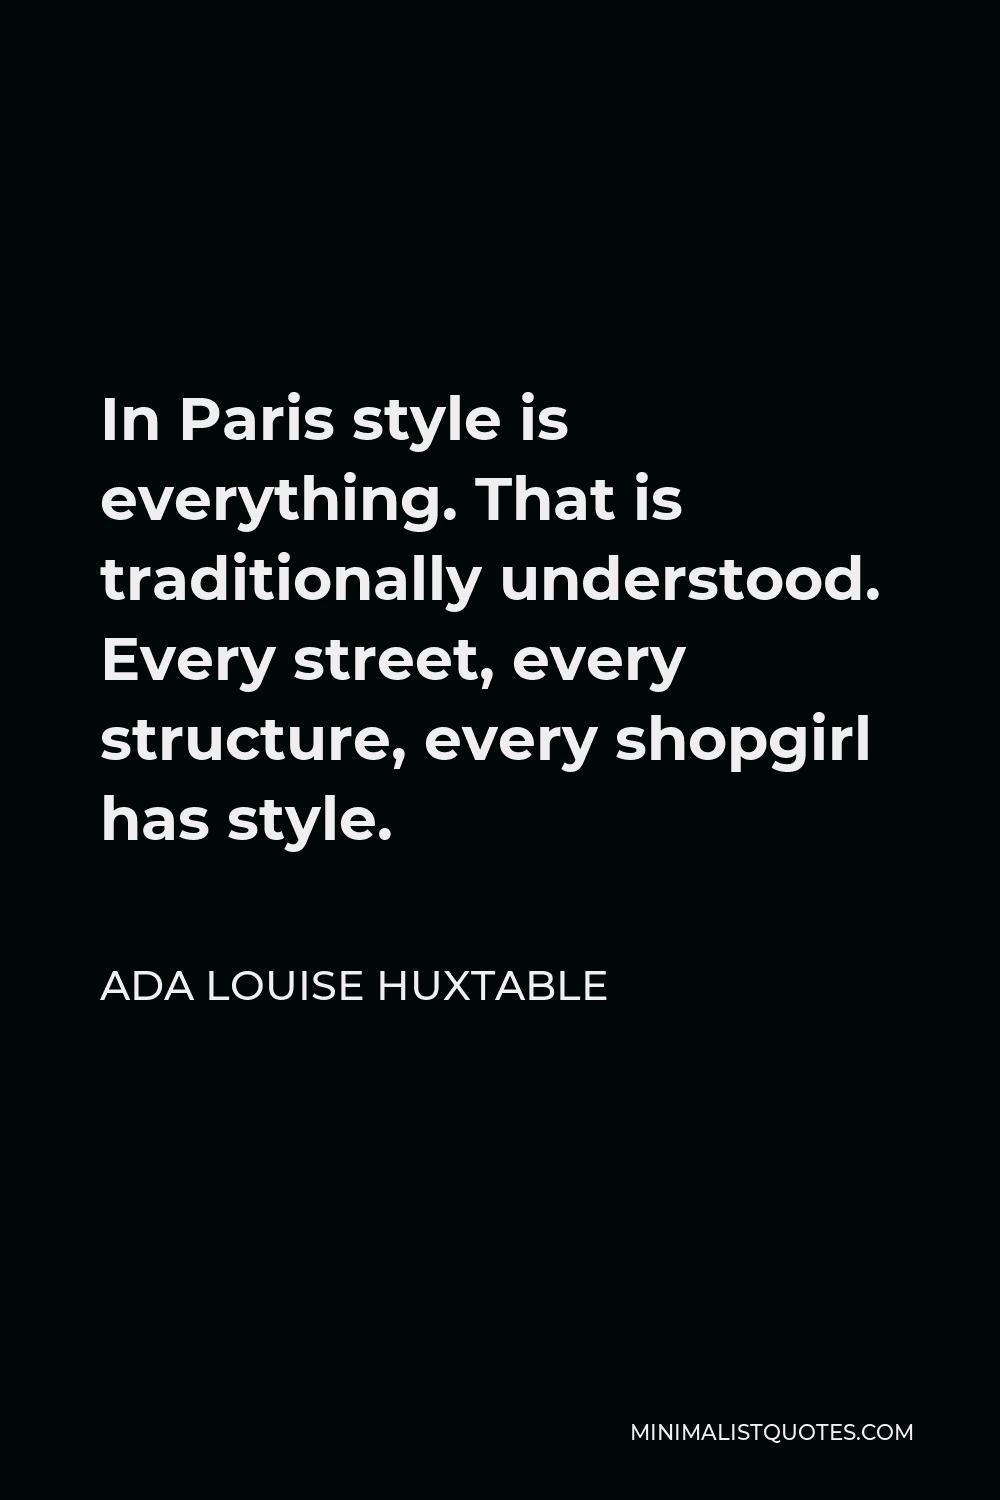 Ada Louise Huxtable Quote - In Paris style is everything. That is traditionally understood. Every street, every structure, every shopgirl has style.